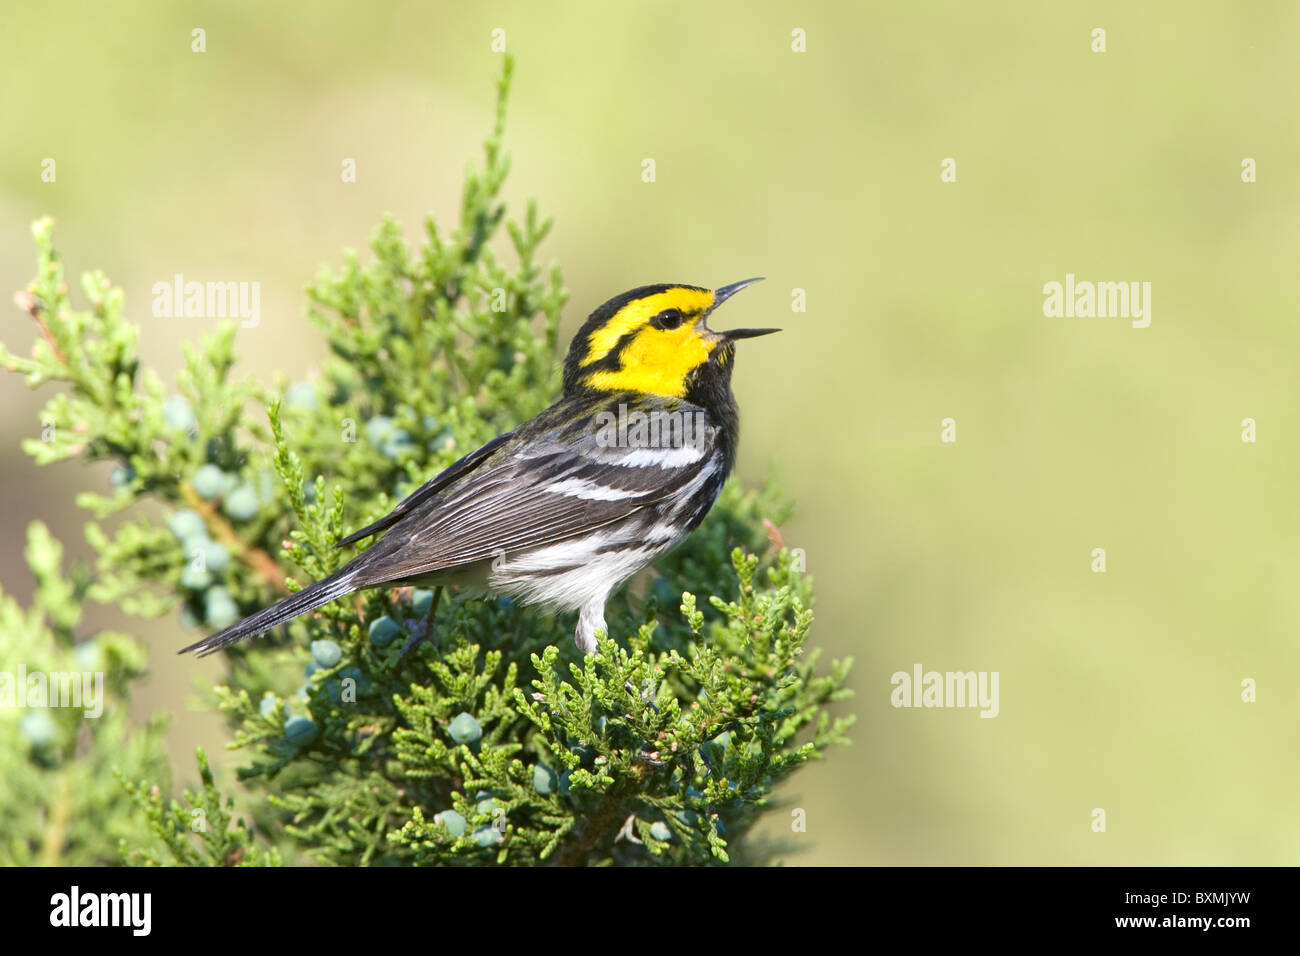 Golden-cheeked Warbler perched on Ashe Juniper Tree Stock Photo